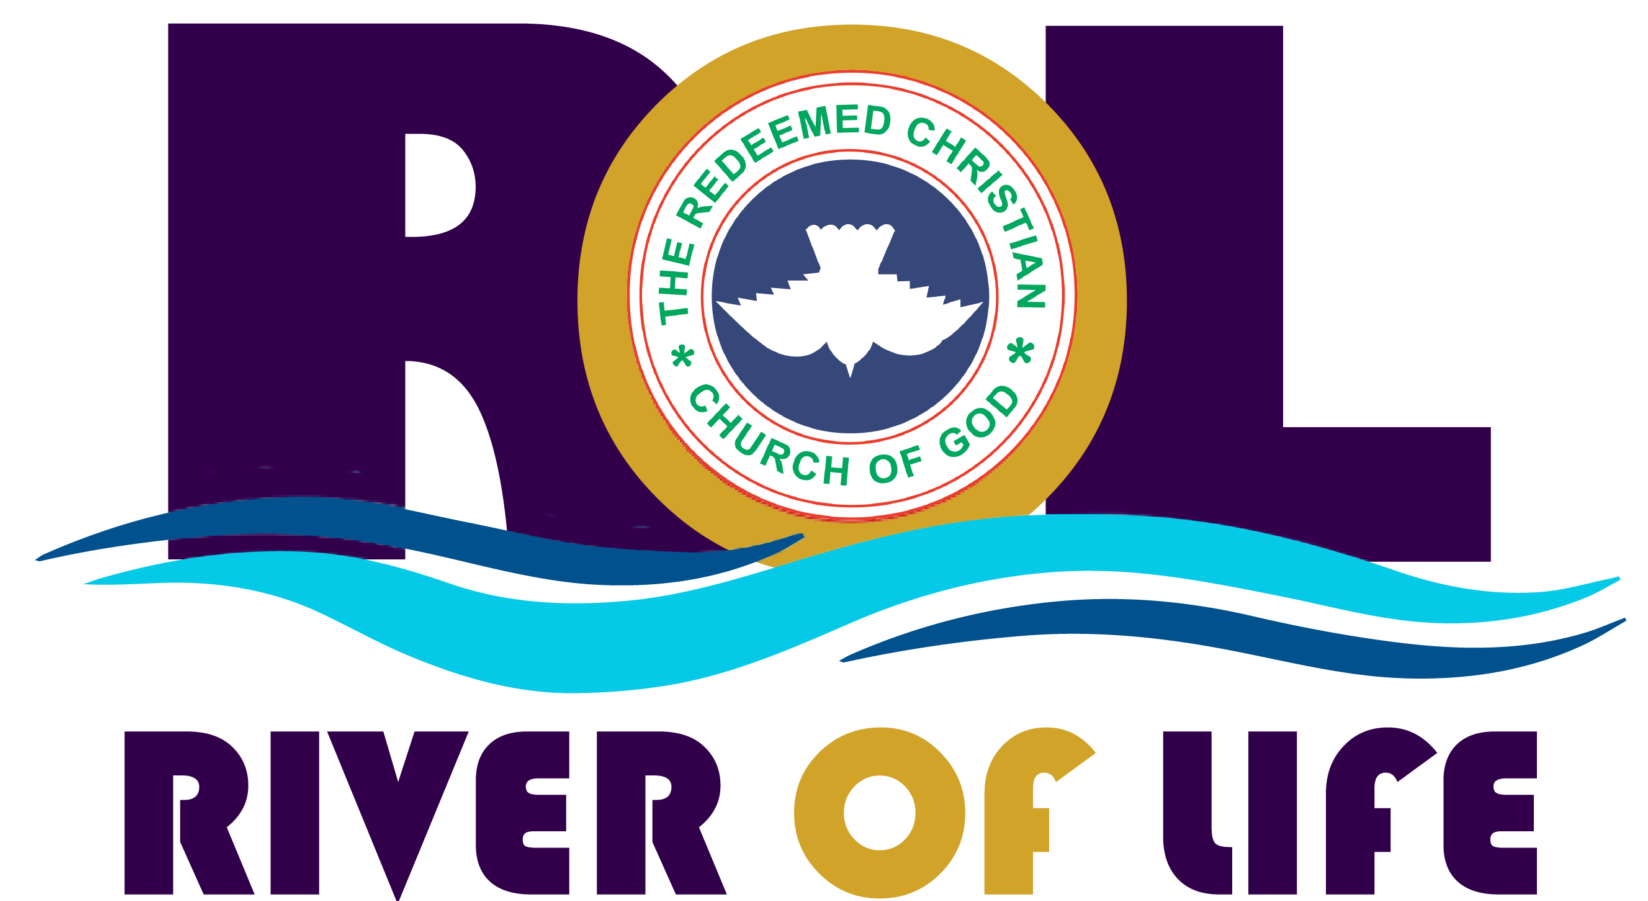 RCCG- River of Life